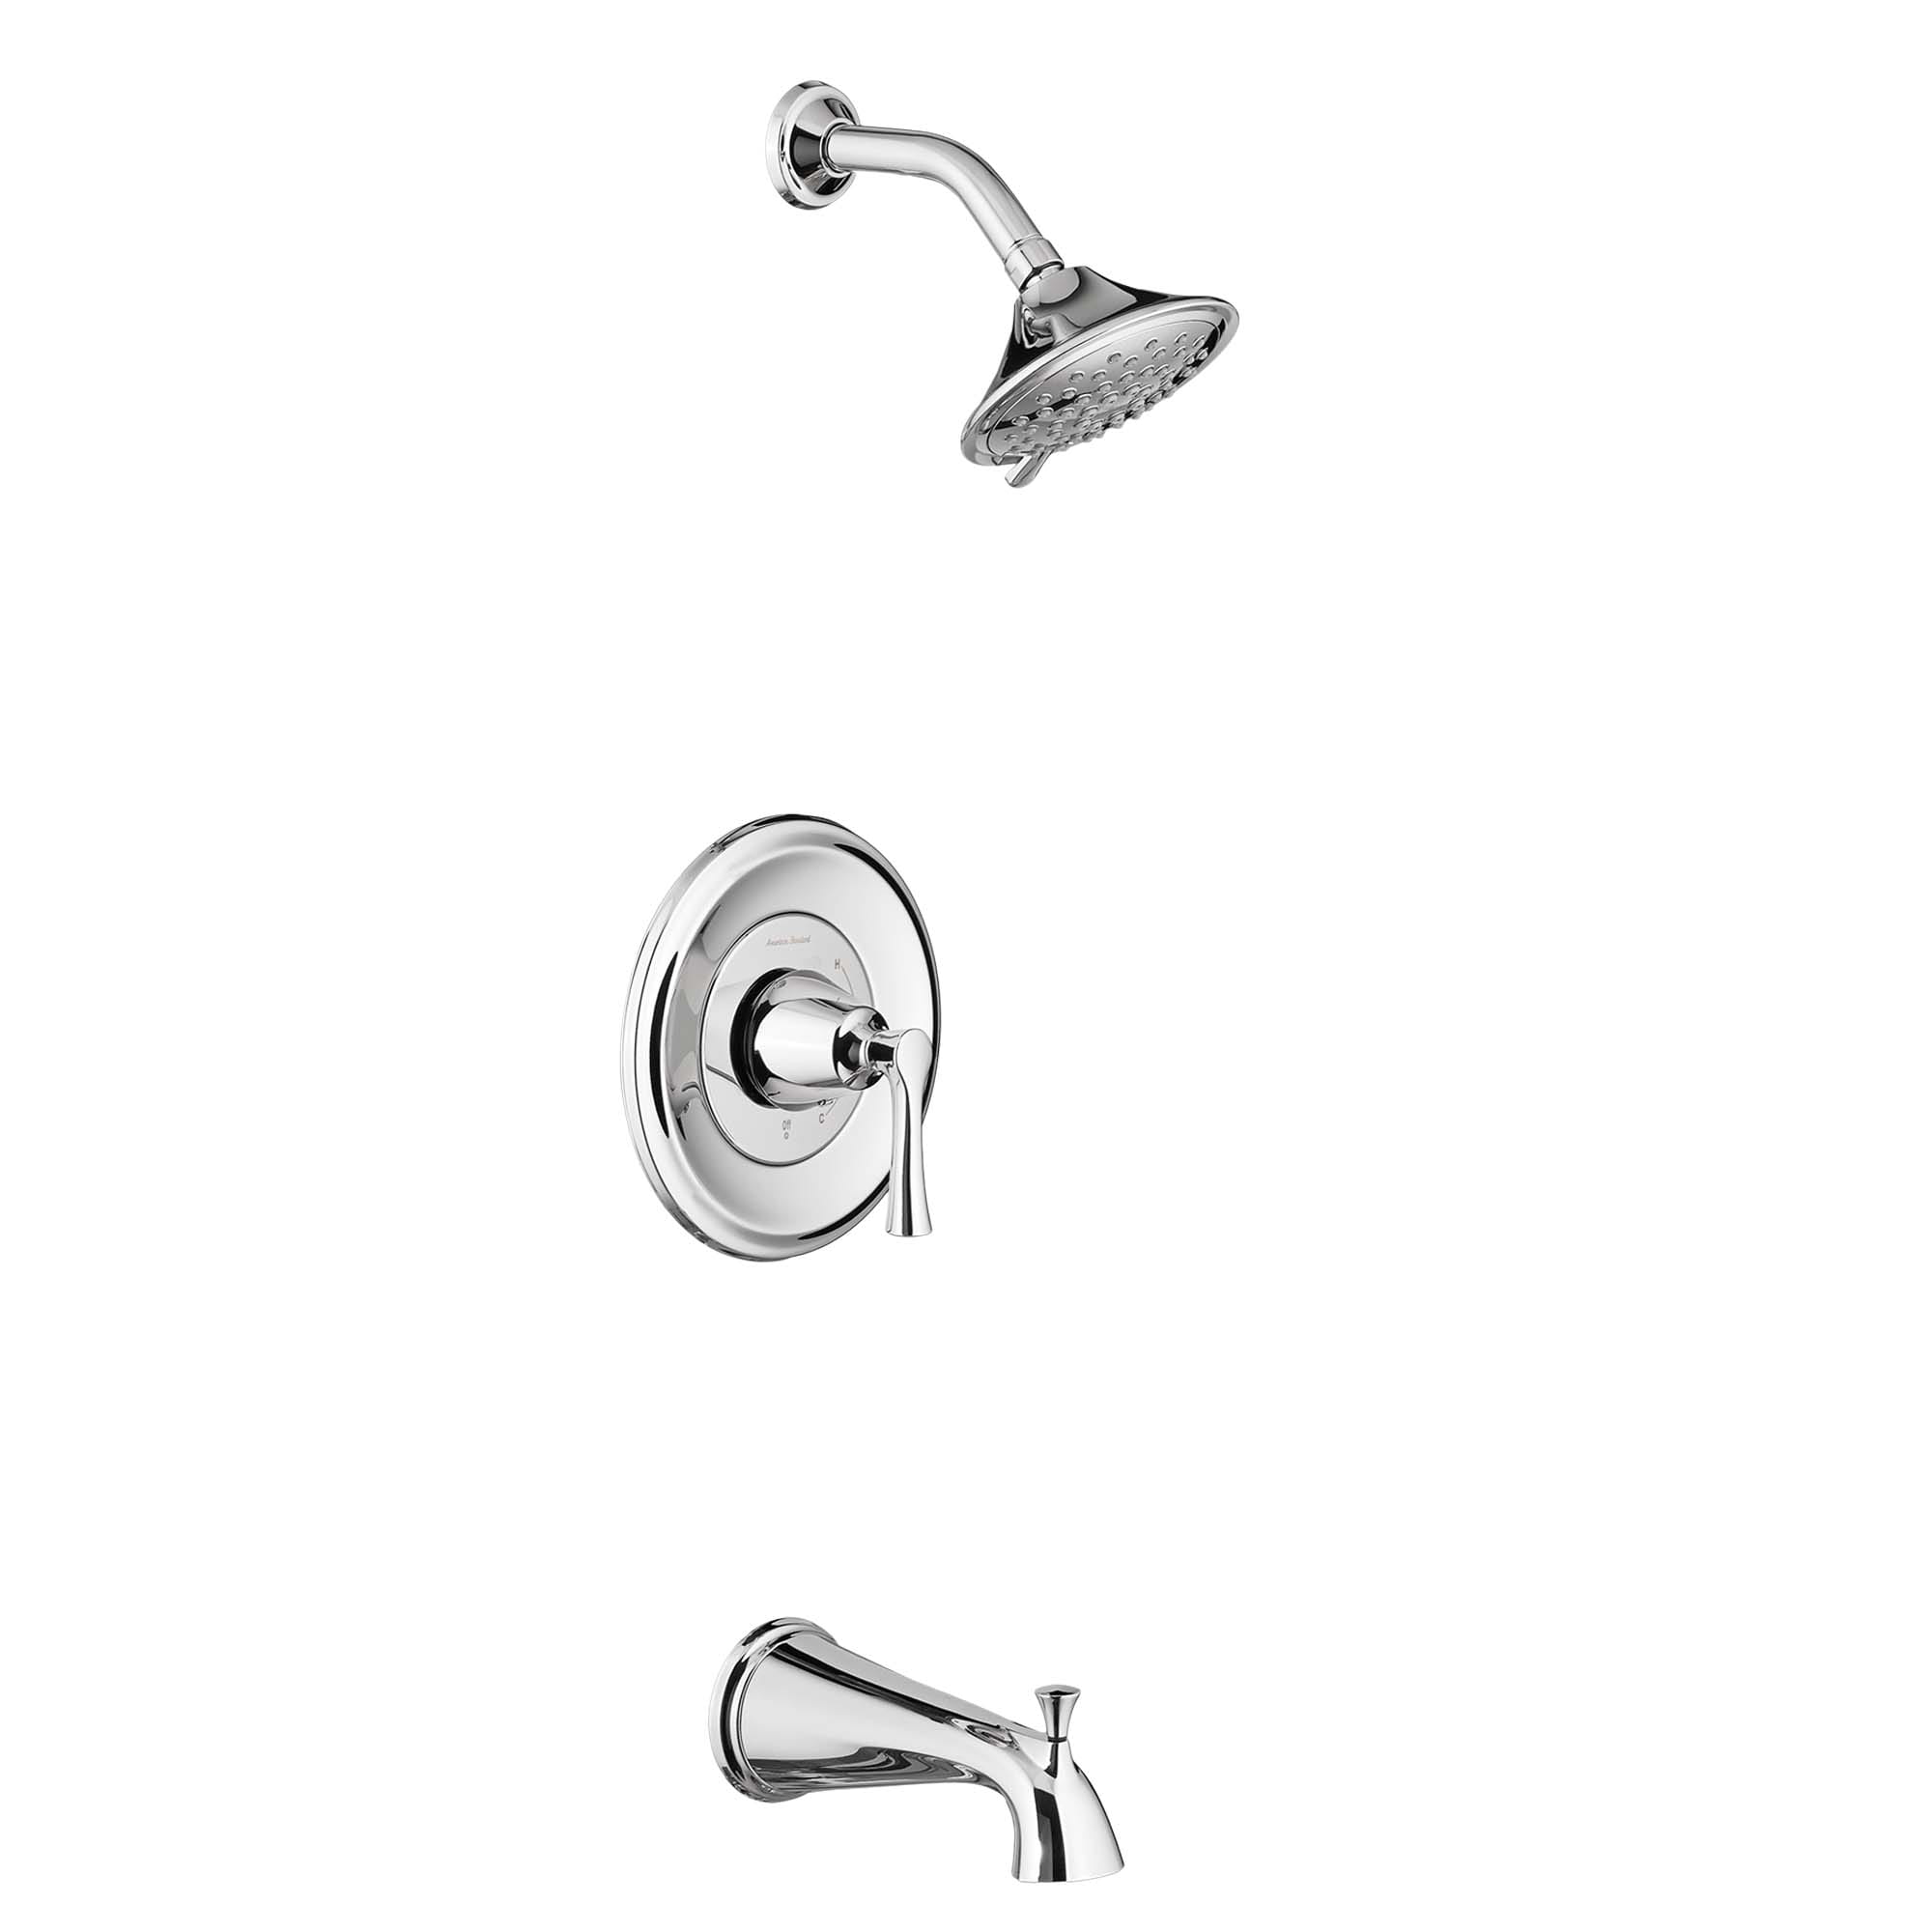 Estate 25 GPM Tub and Shower Trim Kit with 3 Function Showerhead and Lever Handle CHROME